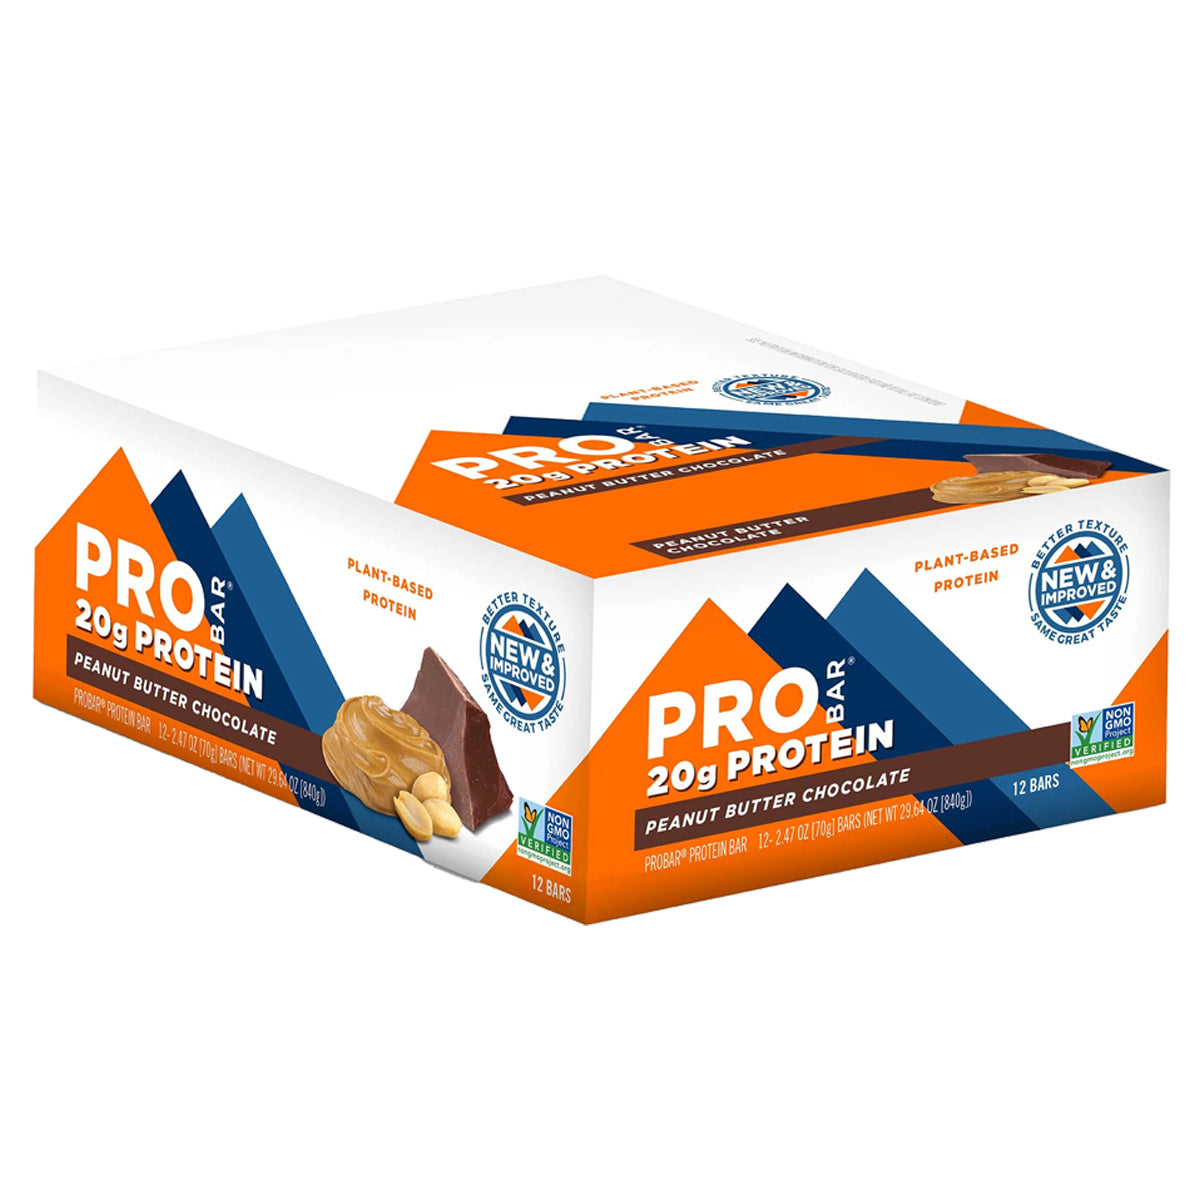 PROBAR Protein Bars in Peanut Butter Chocolate by GOHUNT | Pro Bar - GOHUNT Shop